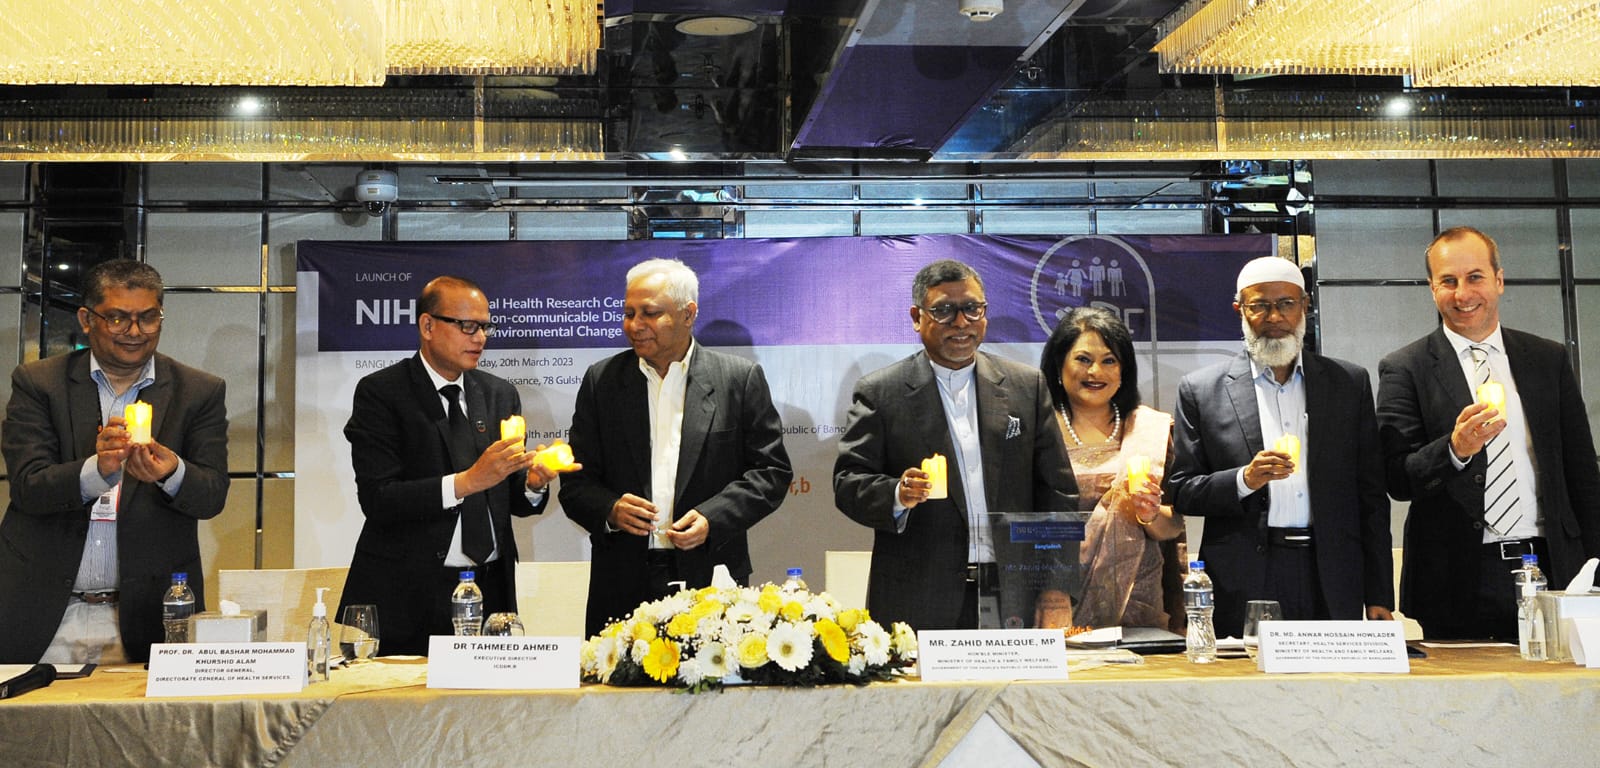 Global Health Research Centre for Non-Communicable Diseases and Environmental Change launched in Dhaka